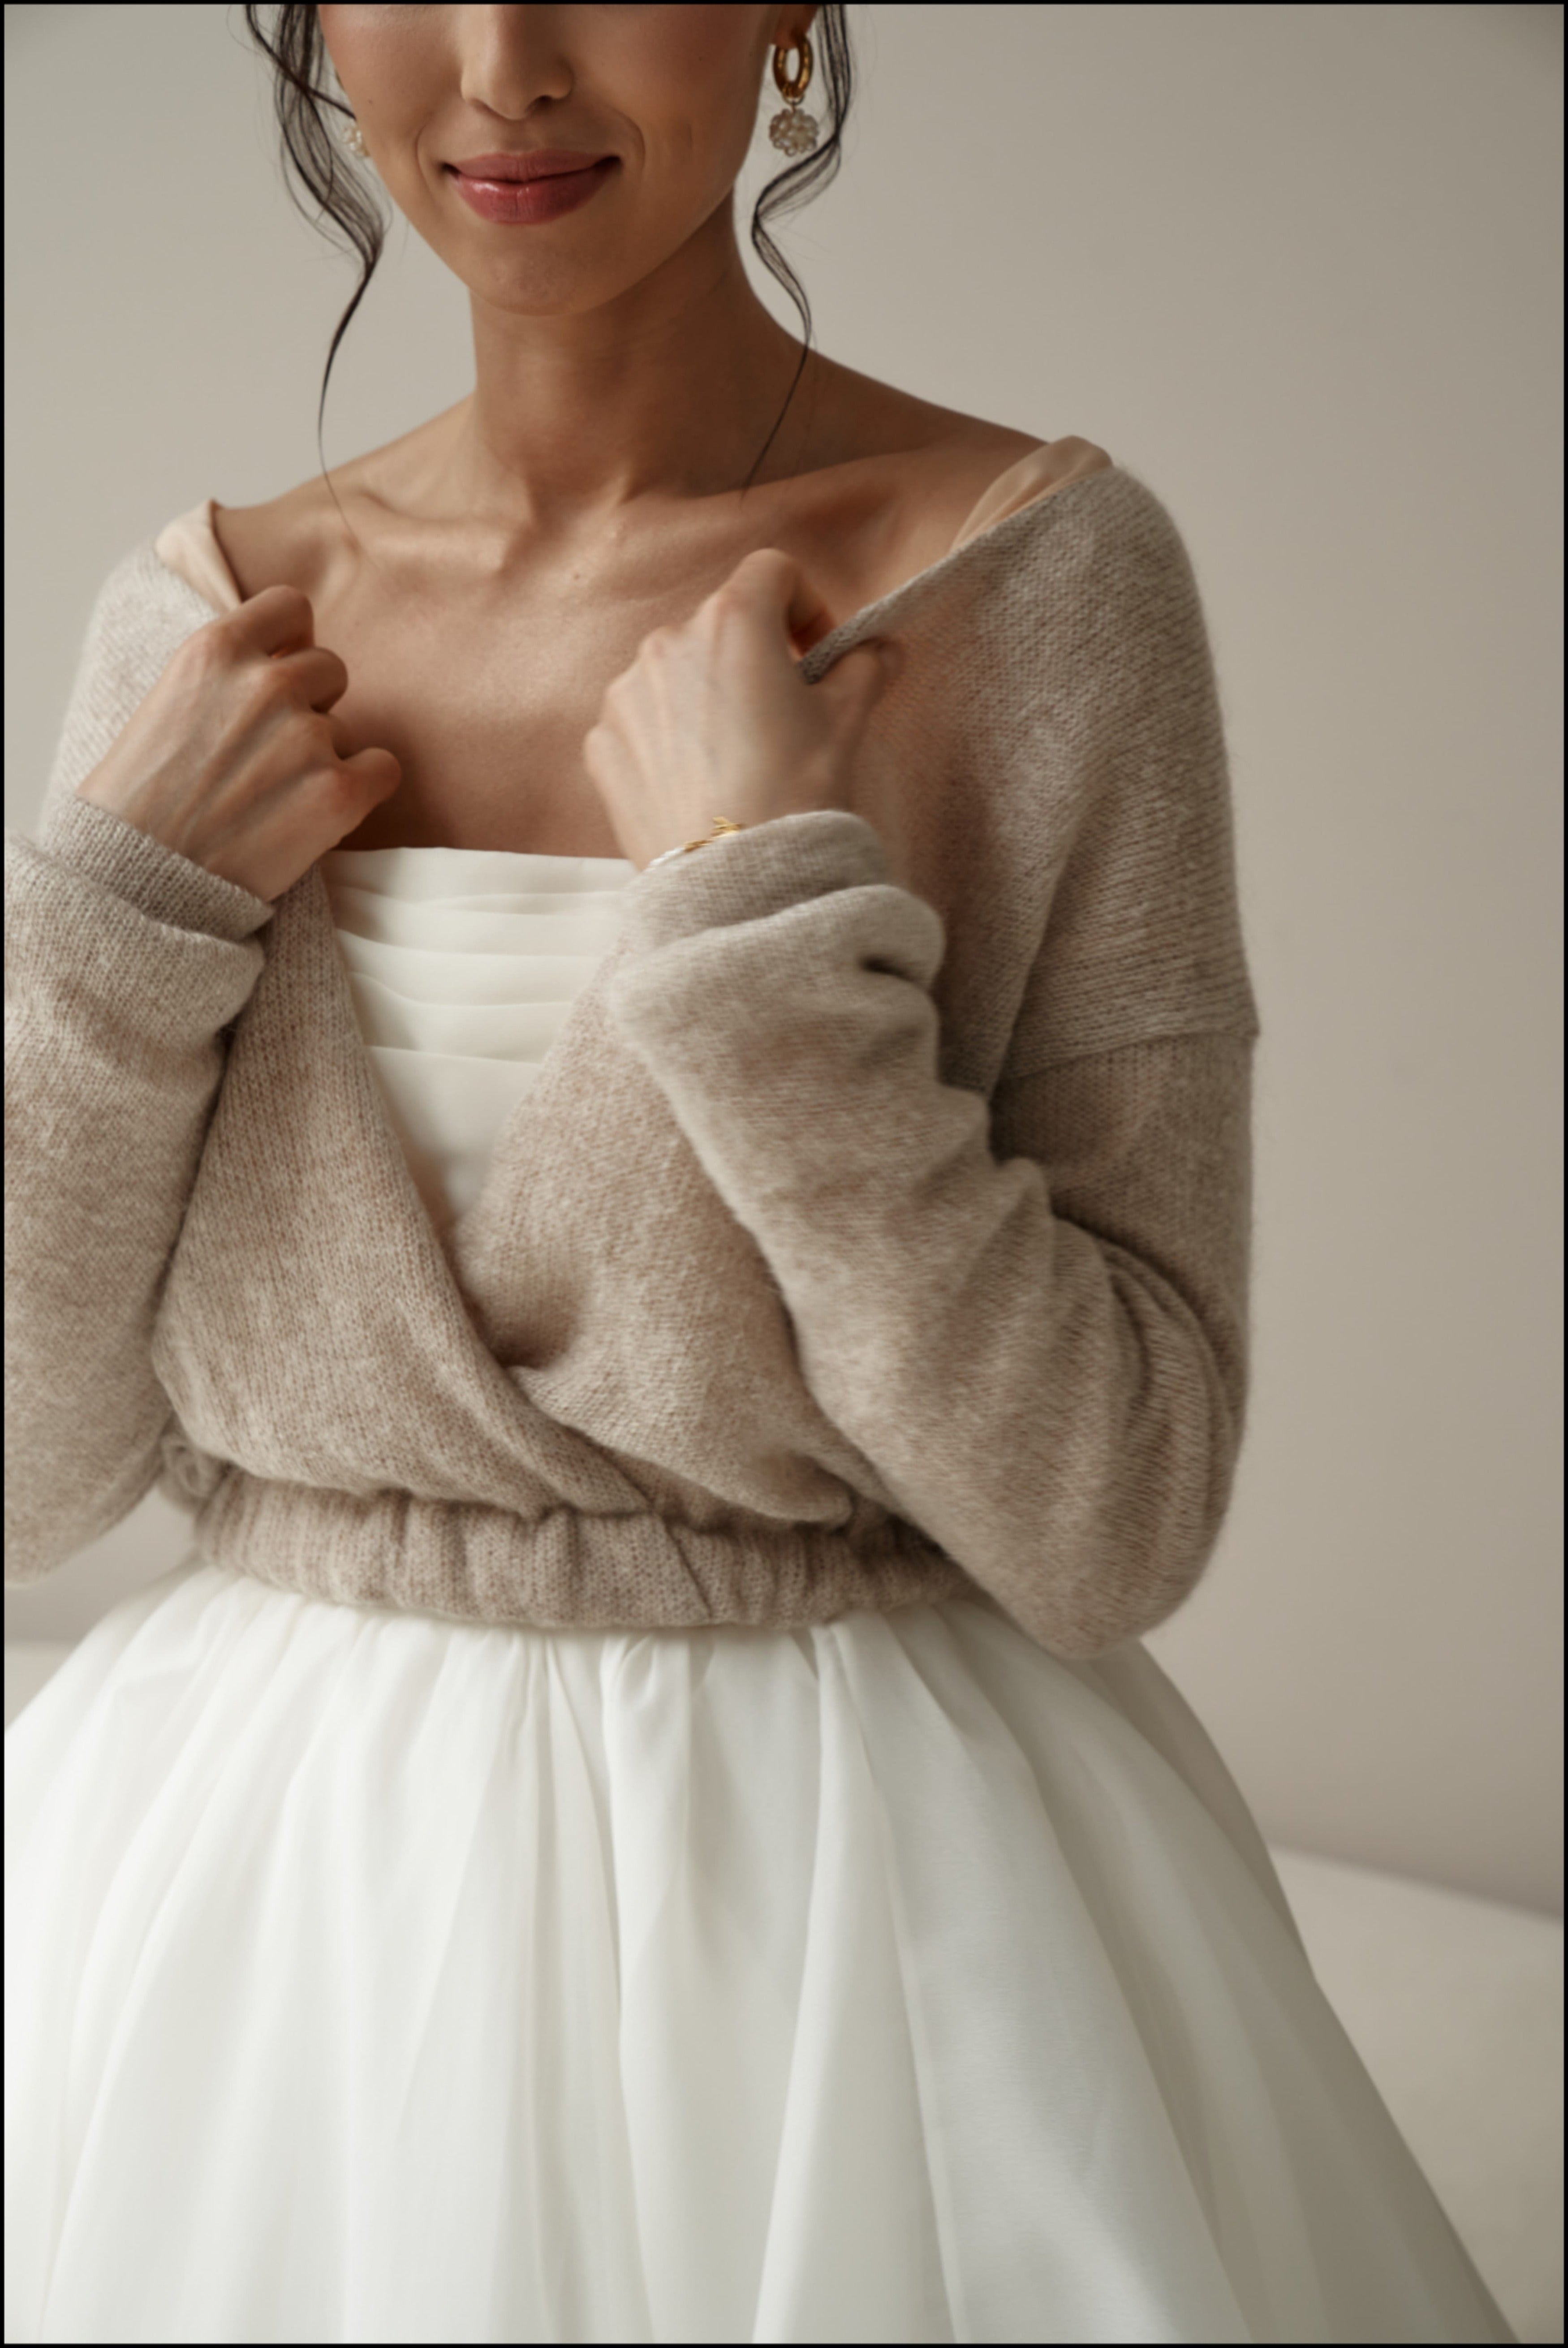 Wedding sweater in taupe color with bow on back. Wedding pullover wıth ribbons